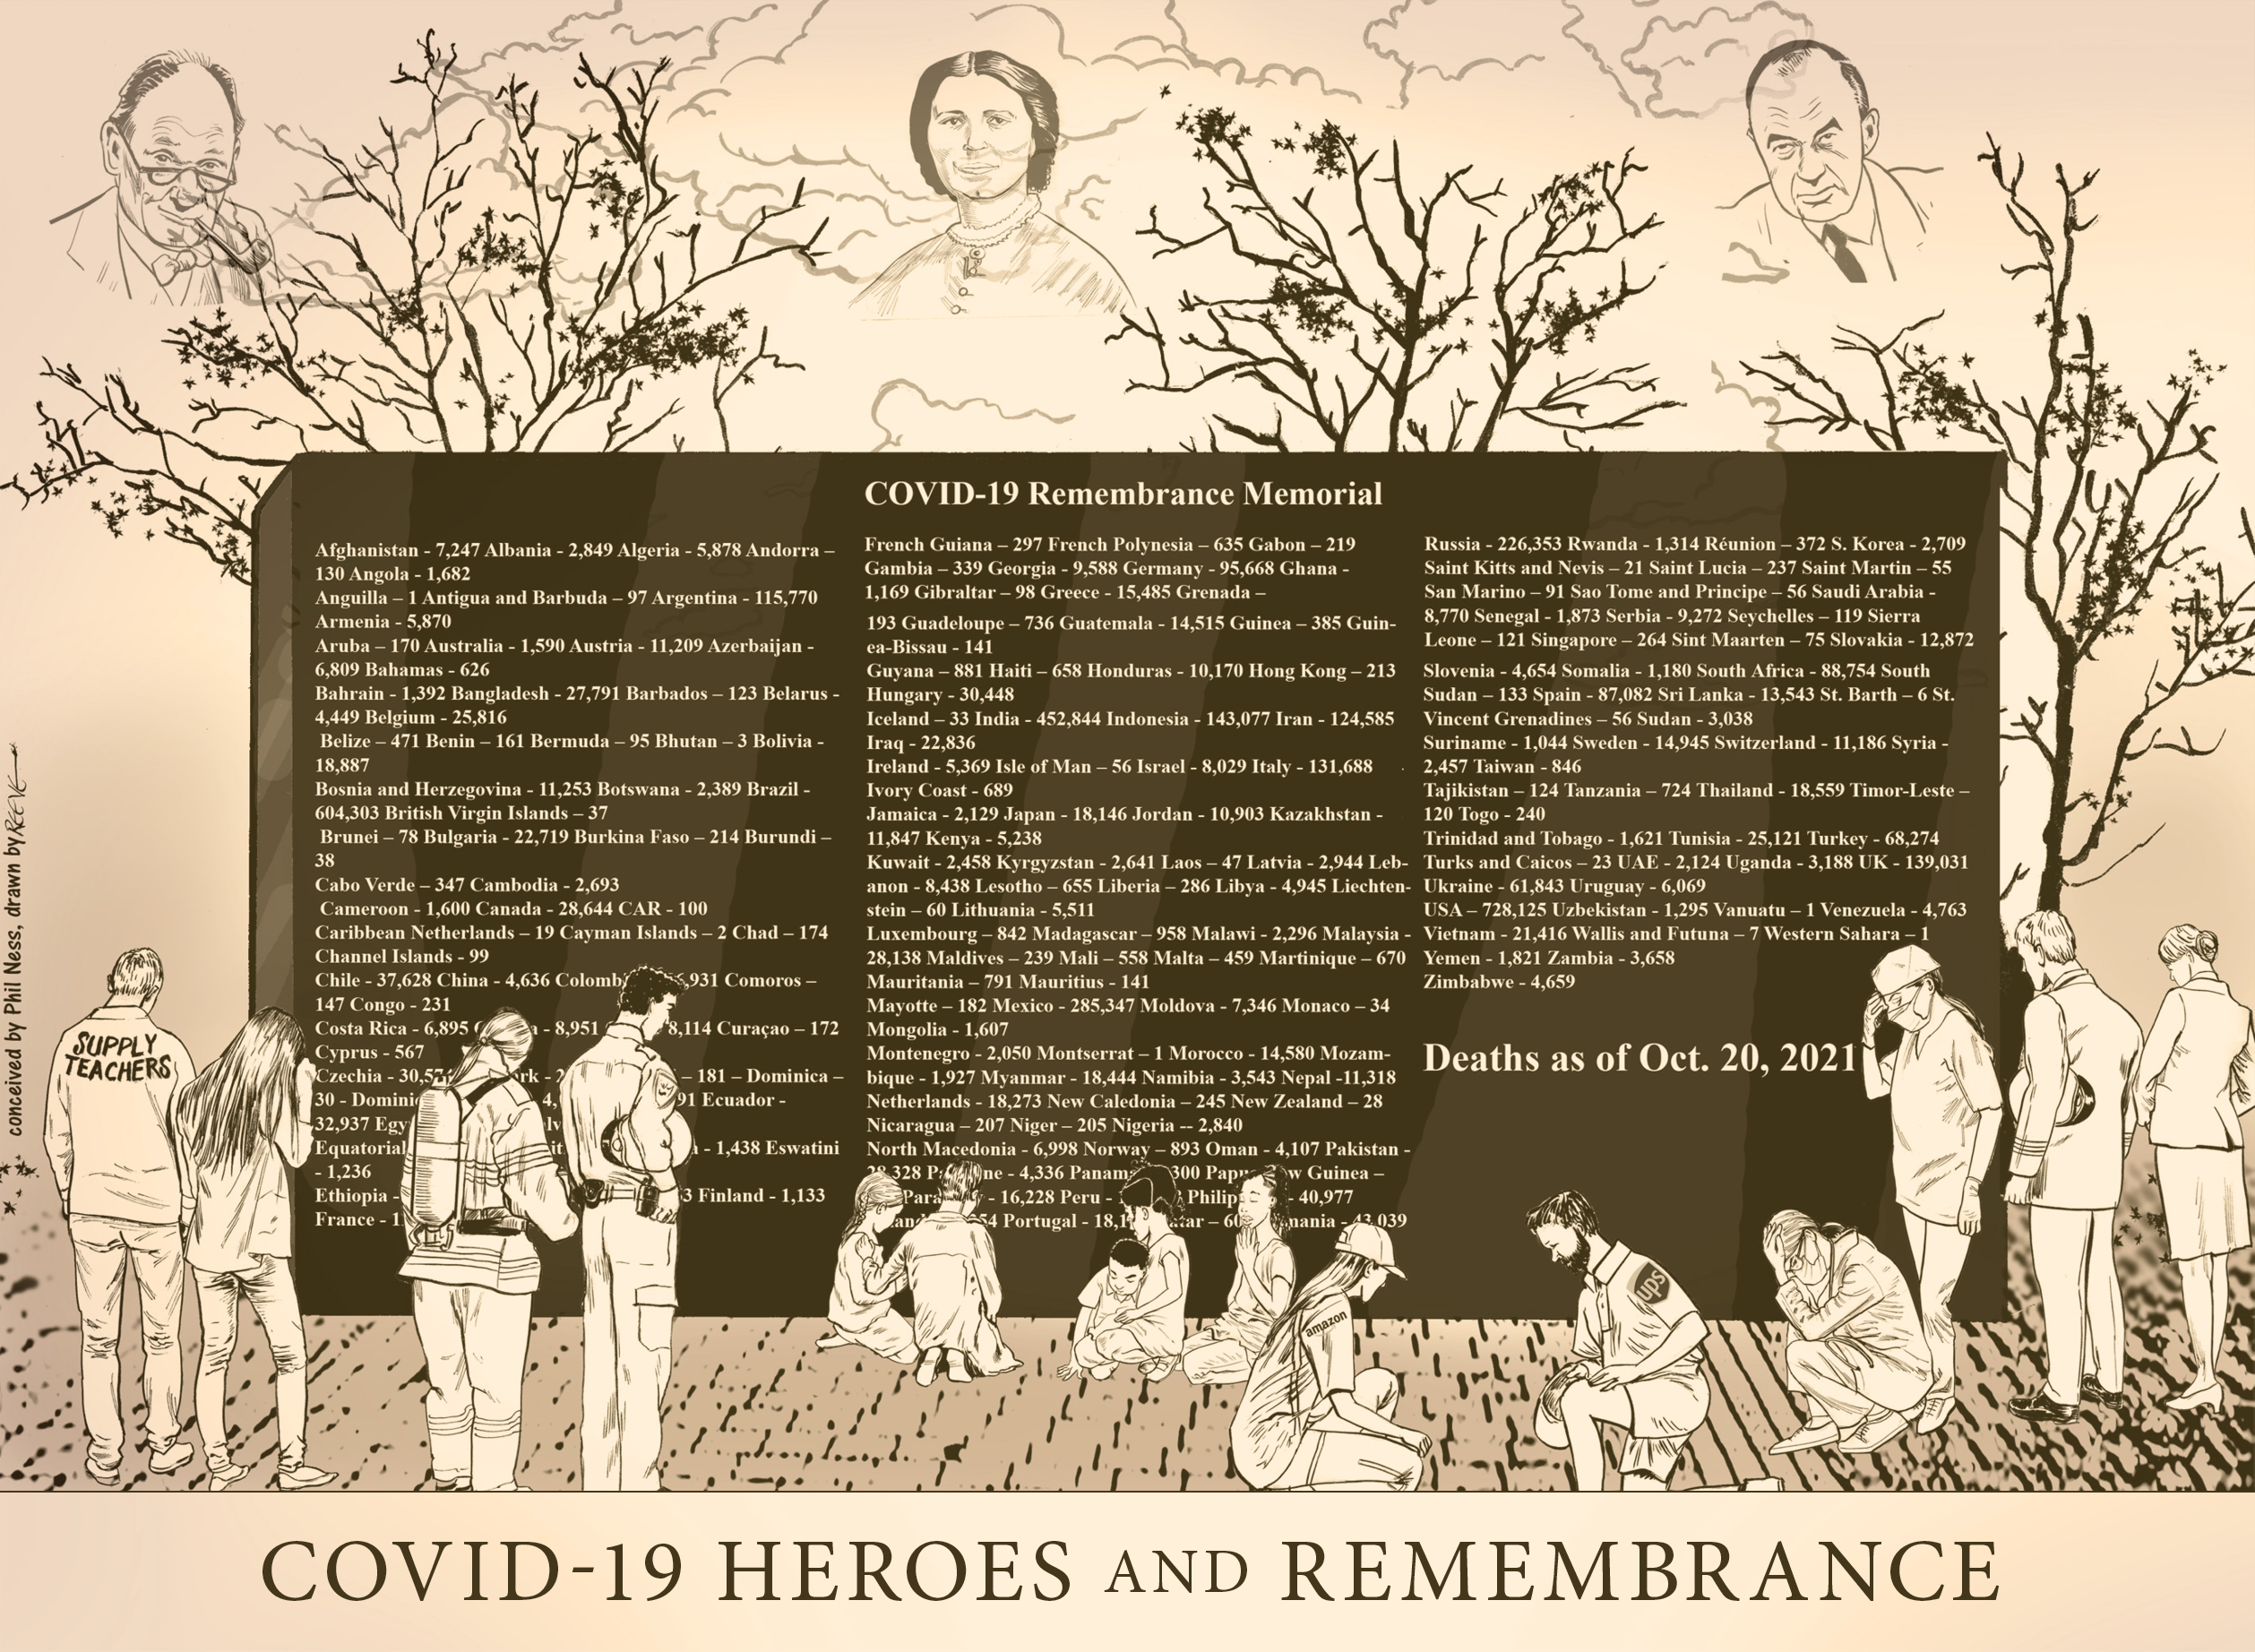 COVID-19 Heroes and Remembrance, conceived by Phil Ness, drawn by Reeve, 2021.